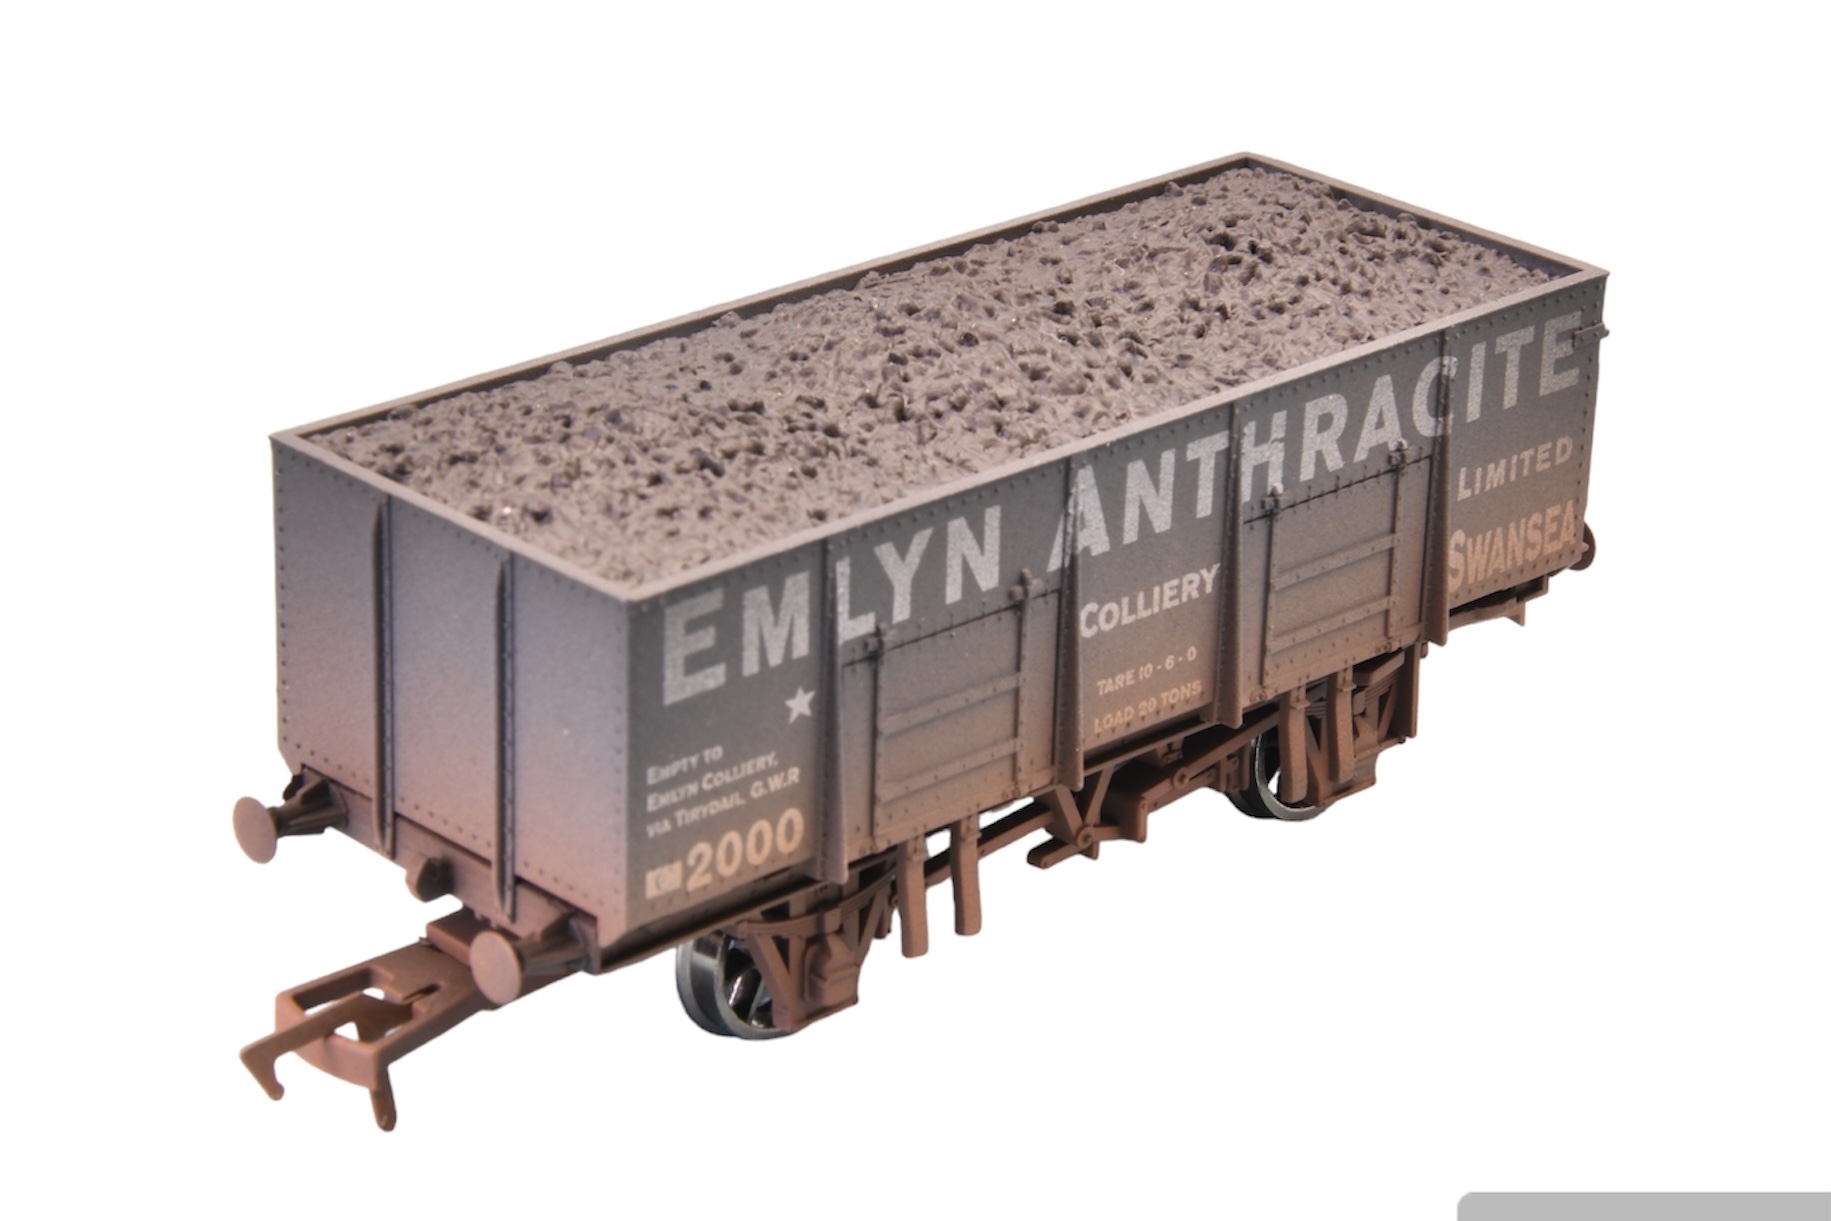 4F-038-002 Dapol 20T STEEL MINERAL EMLYN ANTHRACITE WEATHERED